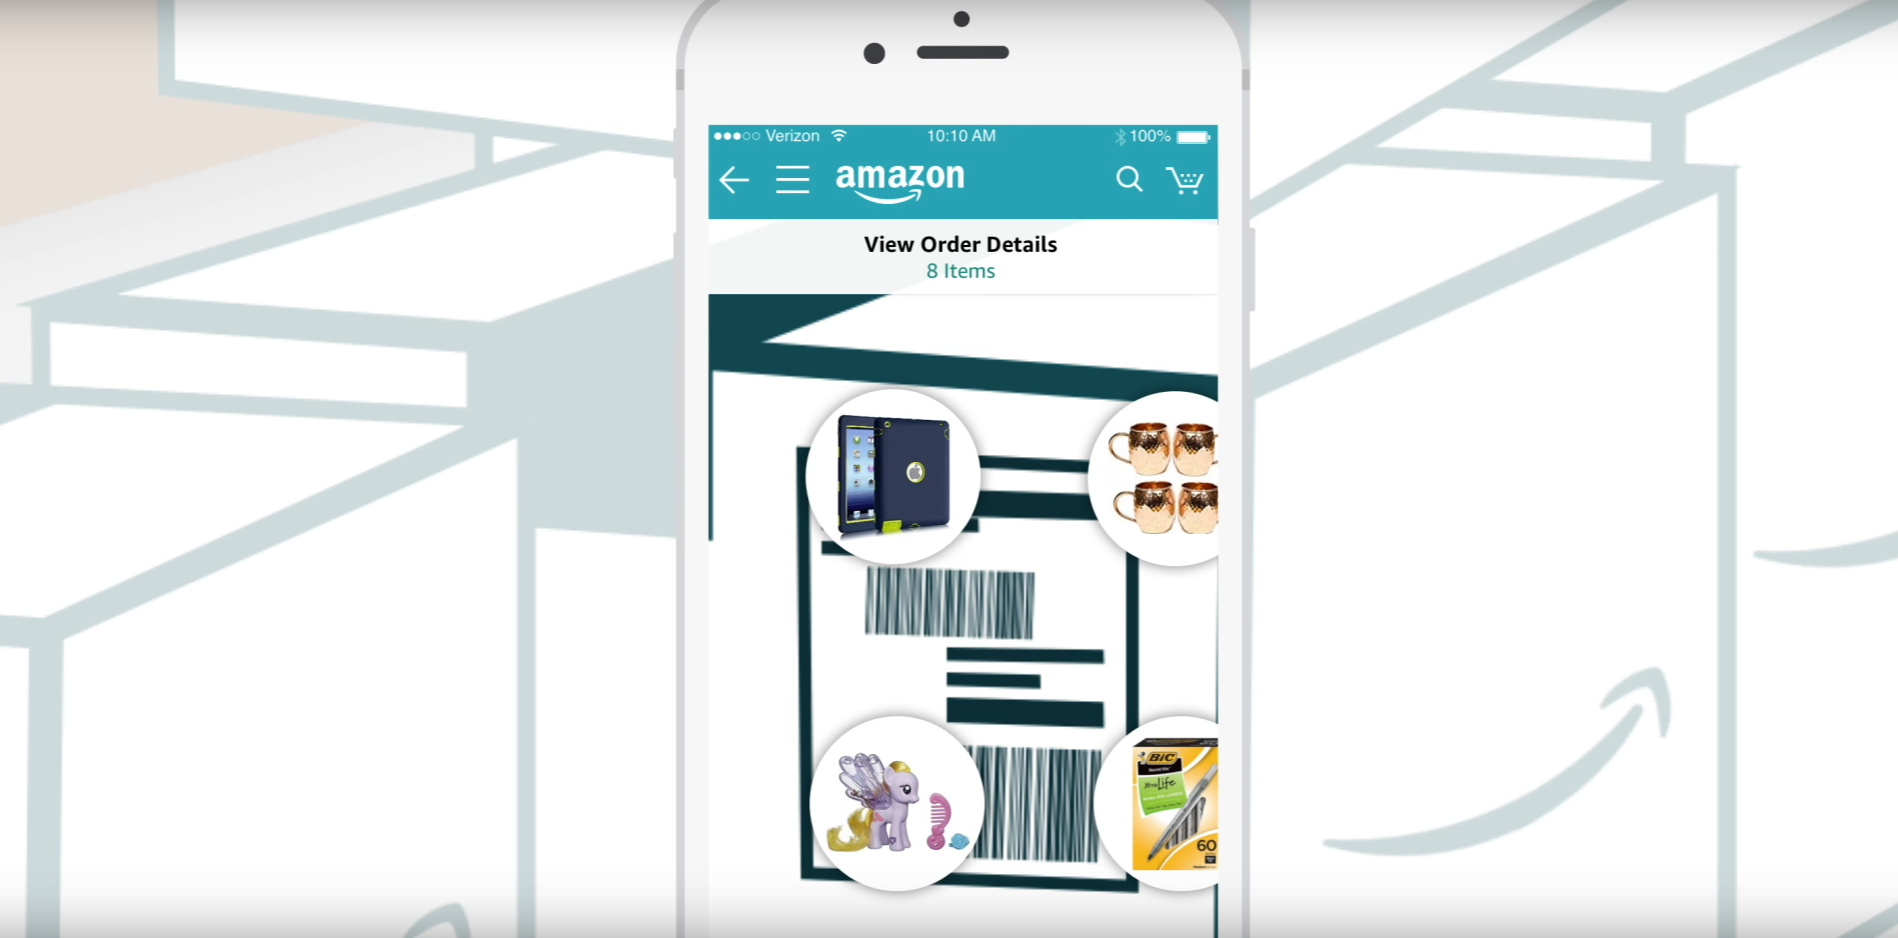 Amazon&#039;s iPhone app now allows you to see what&#039;s in your package without opening it